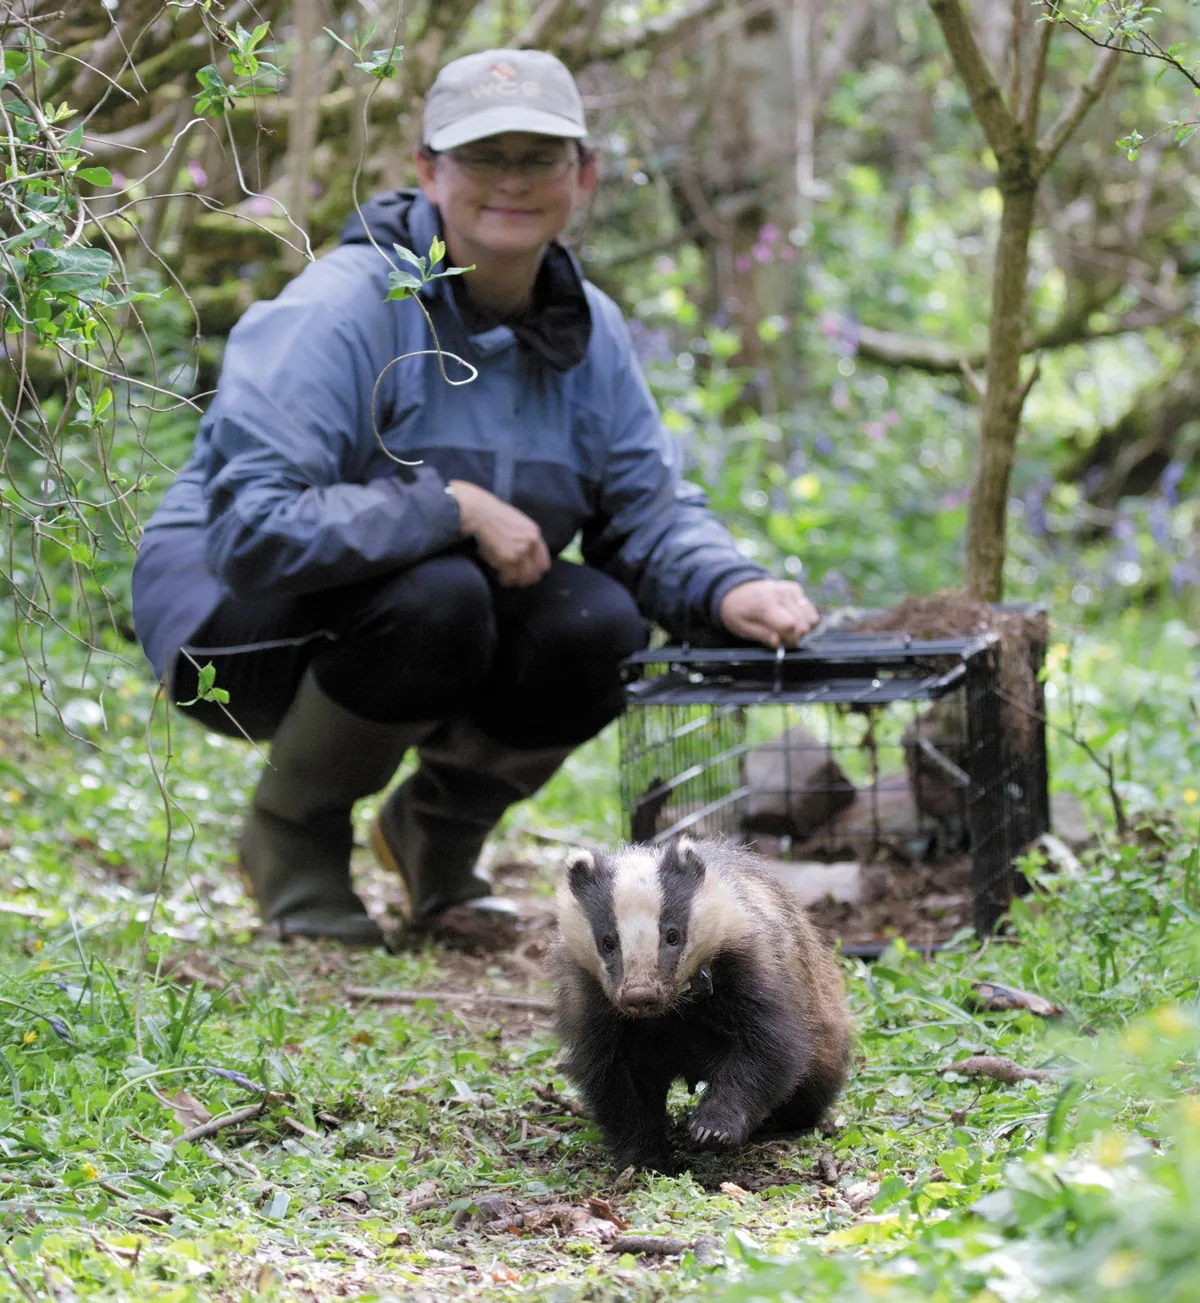 Badger being released from cage by woman